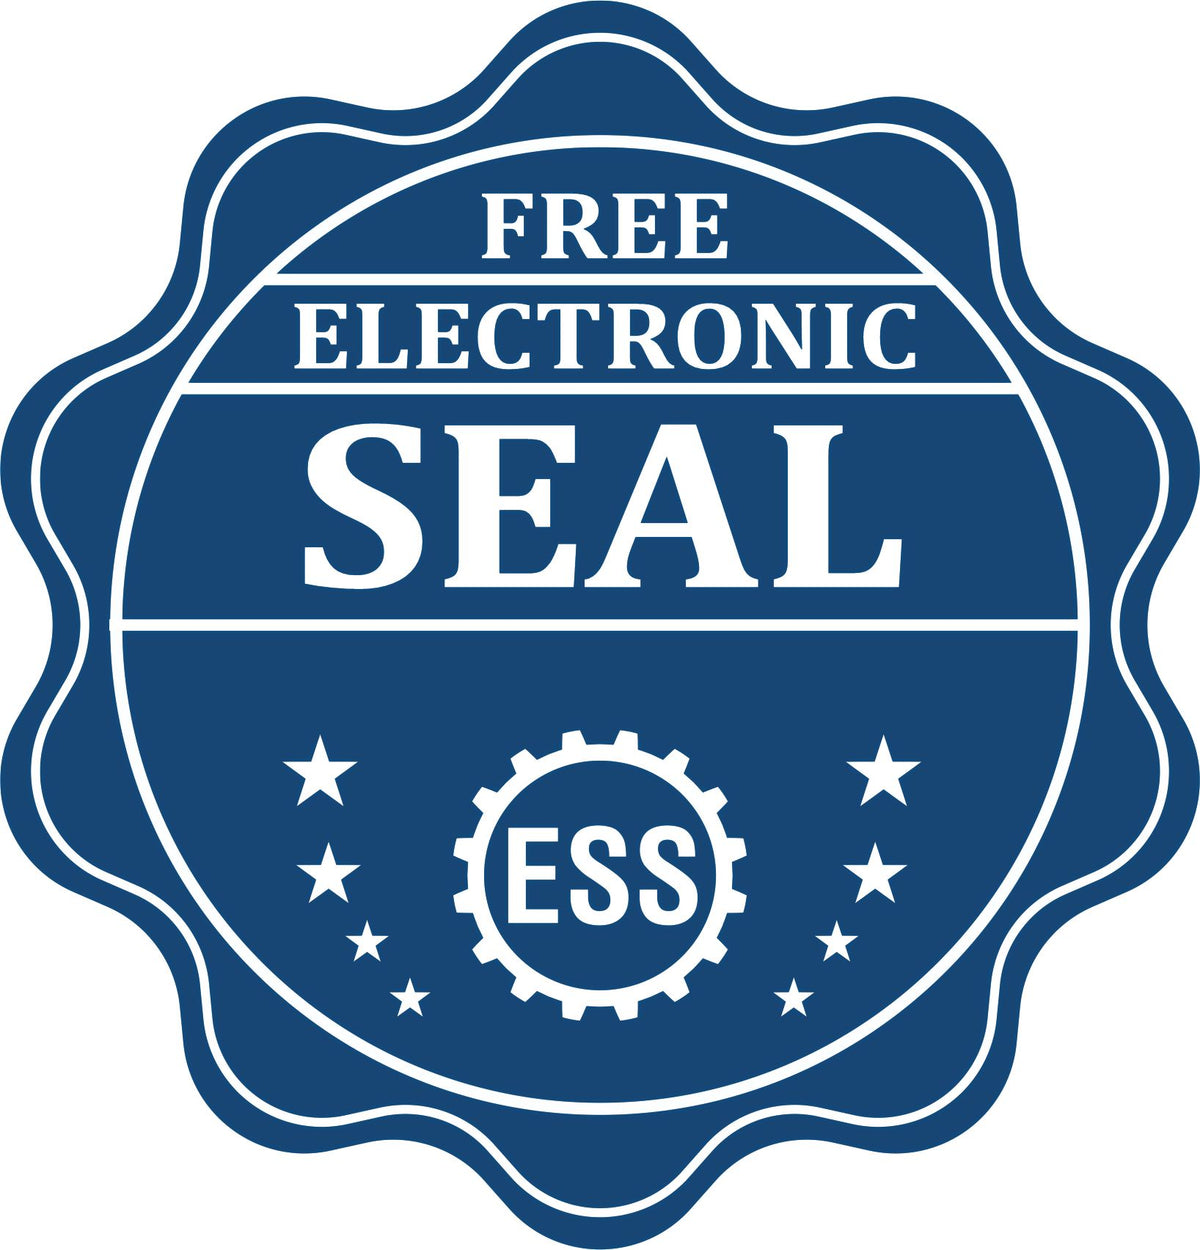 A badge showing a free electronic seal for the Slim Pre-Inked Alabama Landscape Architect Seal Stamp with stars and the ESS gear on the emblem.